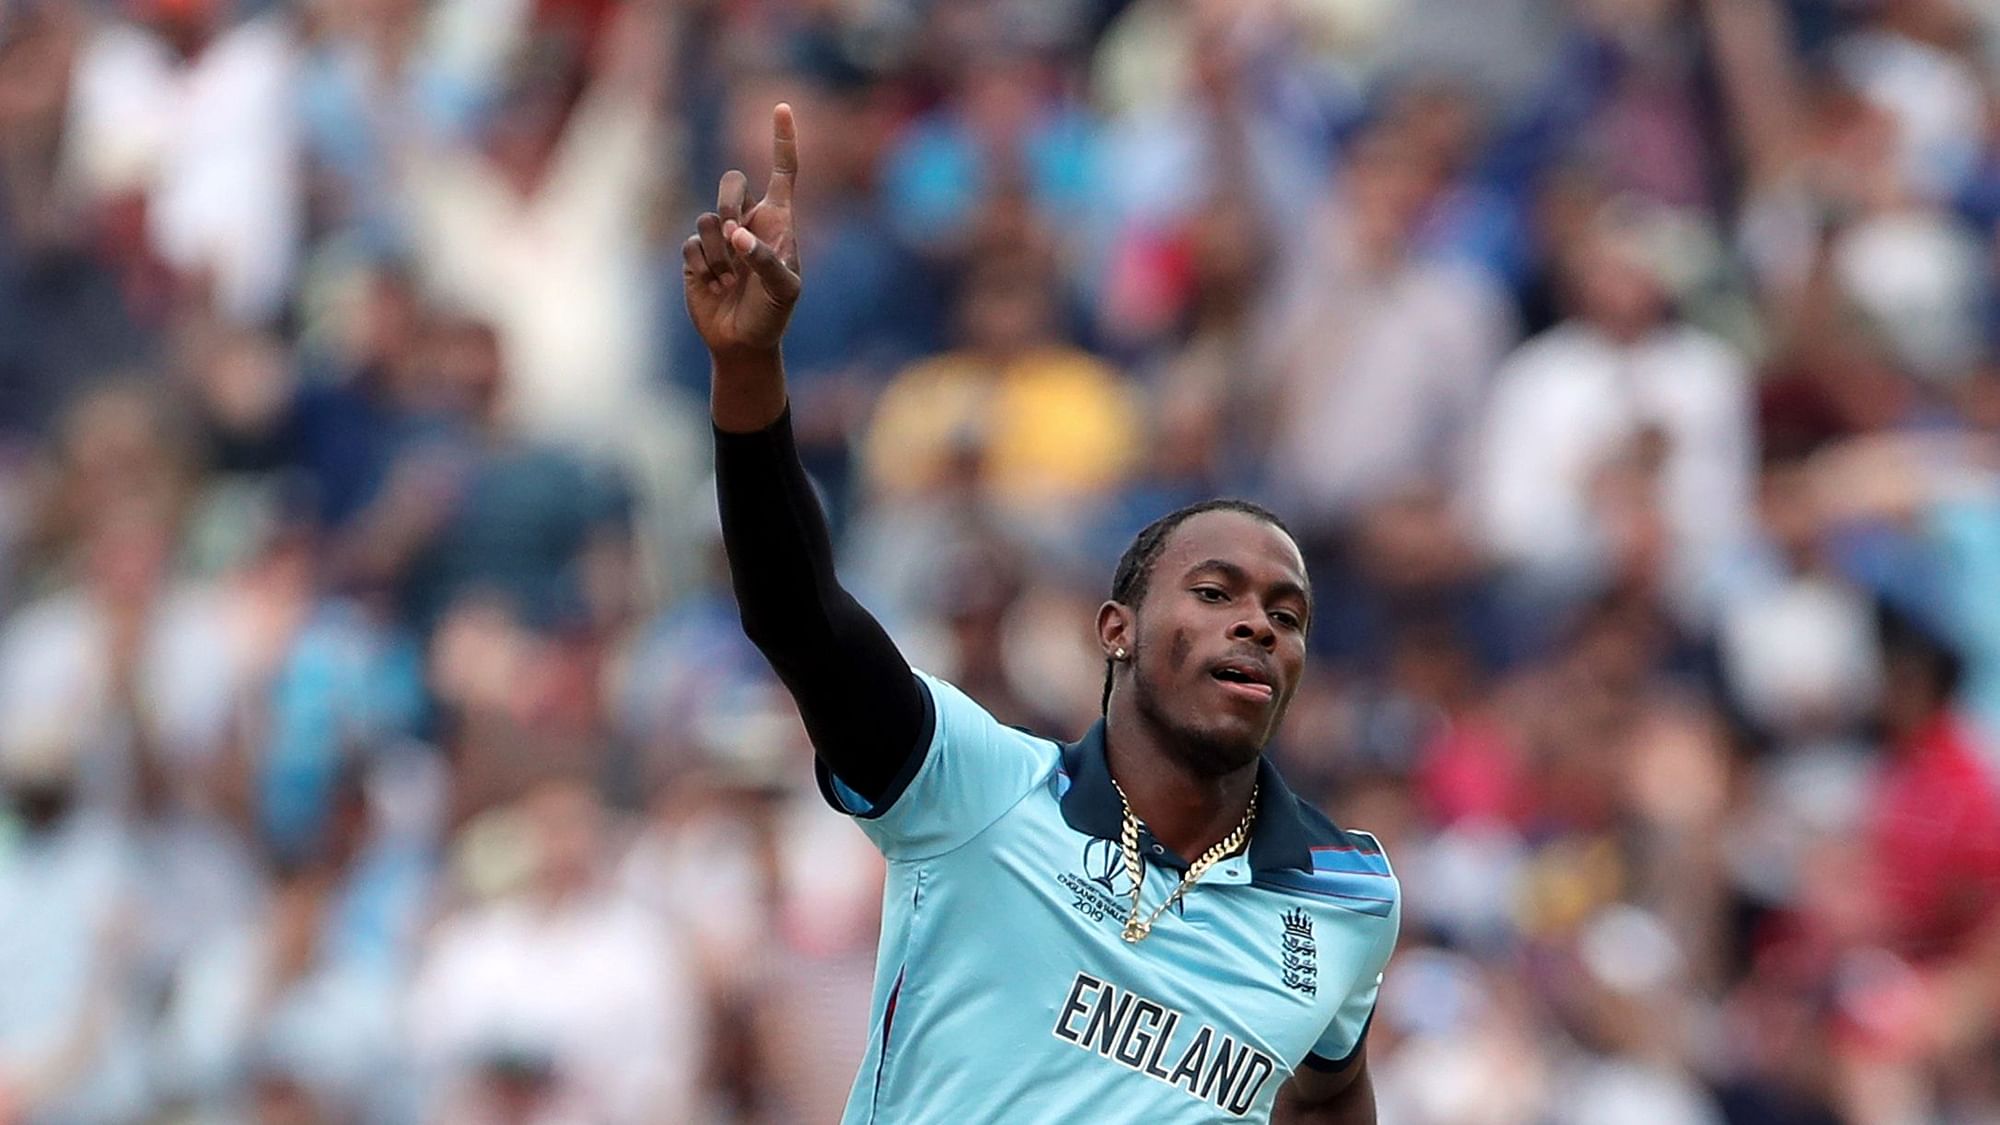 Jofra Archer finished with 20 wickets in the tournament.